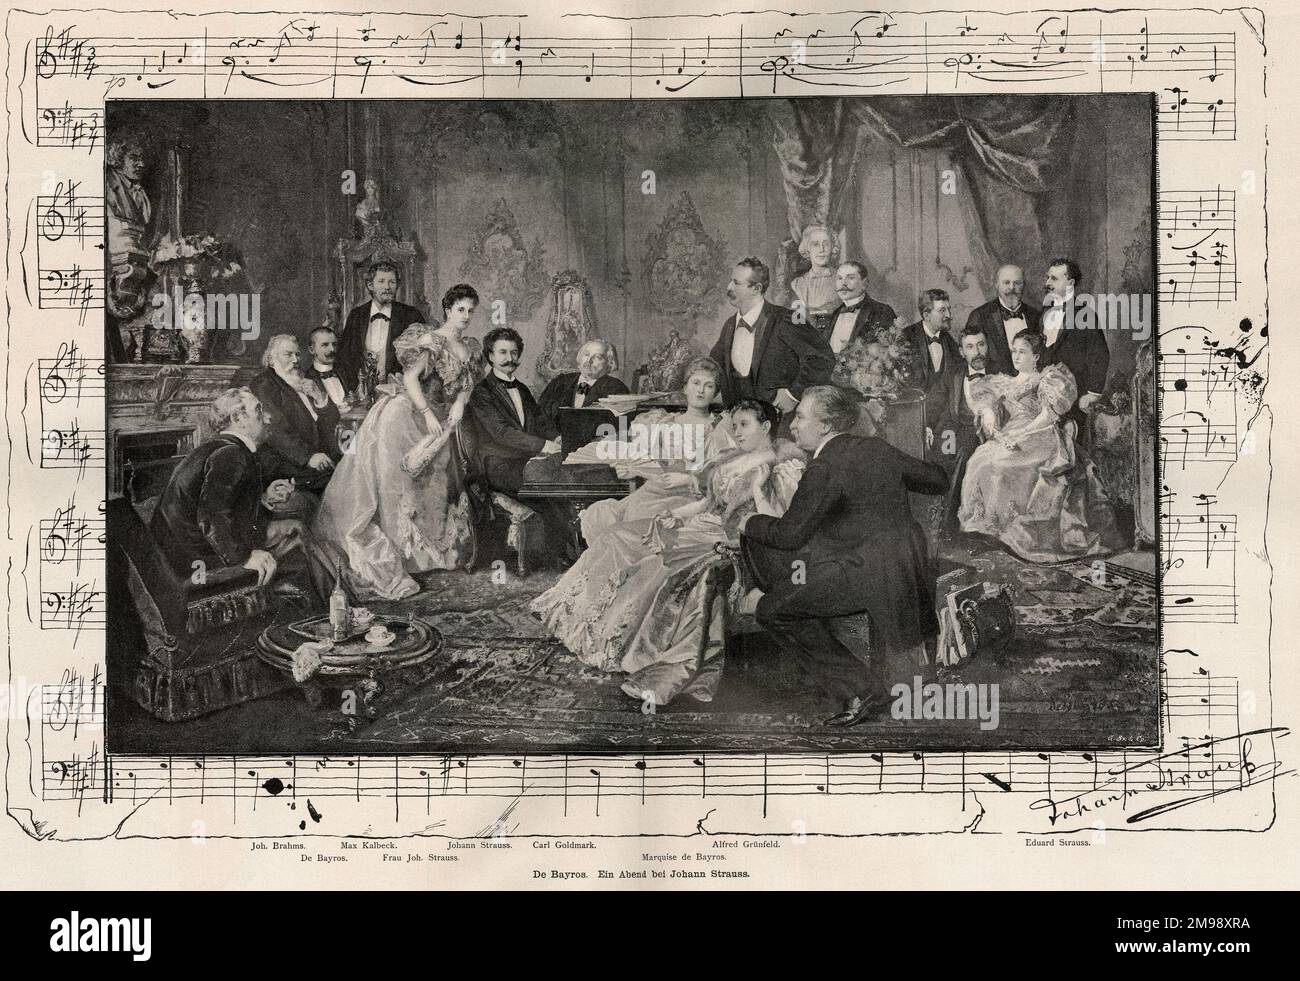 An evening with Johann Strauss, including Johannes Brahms, Max Kalbeck, Johann Strauss (at the piano), Carl Goldmark, Alfred Grunfeld, Eduard Strauss, De Bayros, Mrs Strauss, Marquise De Bayros, all superimposed on a musical manuscript of The Blue Danube Waltz, with Strauss's signature in the lower right corner. Stock Photo